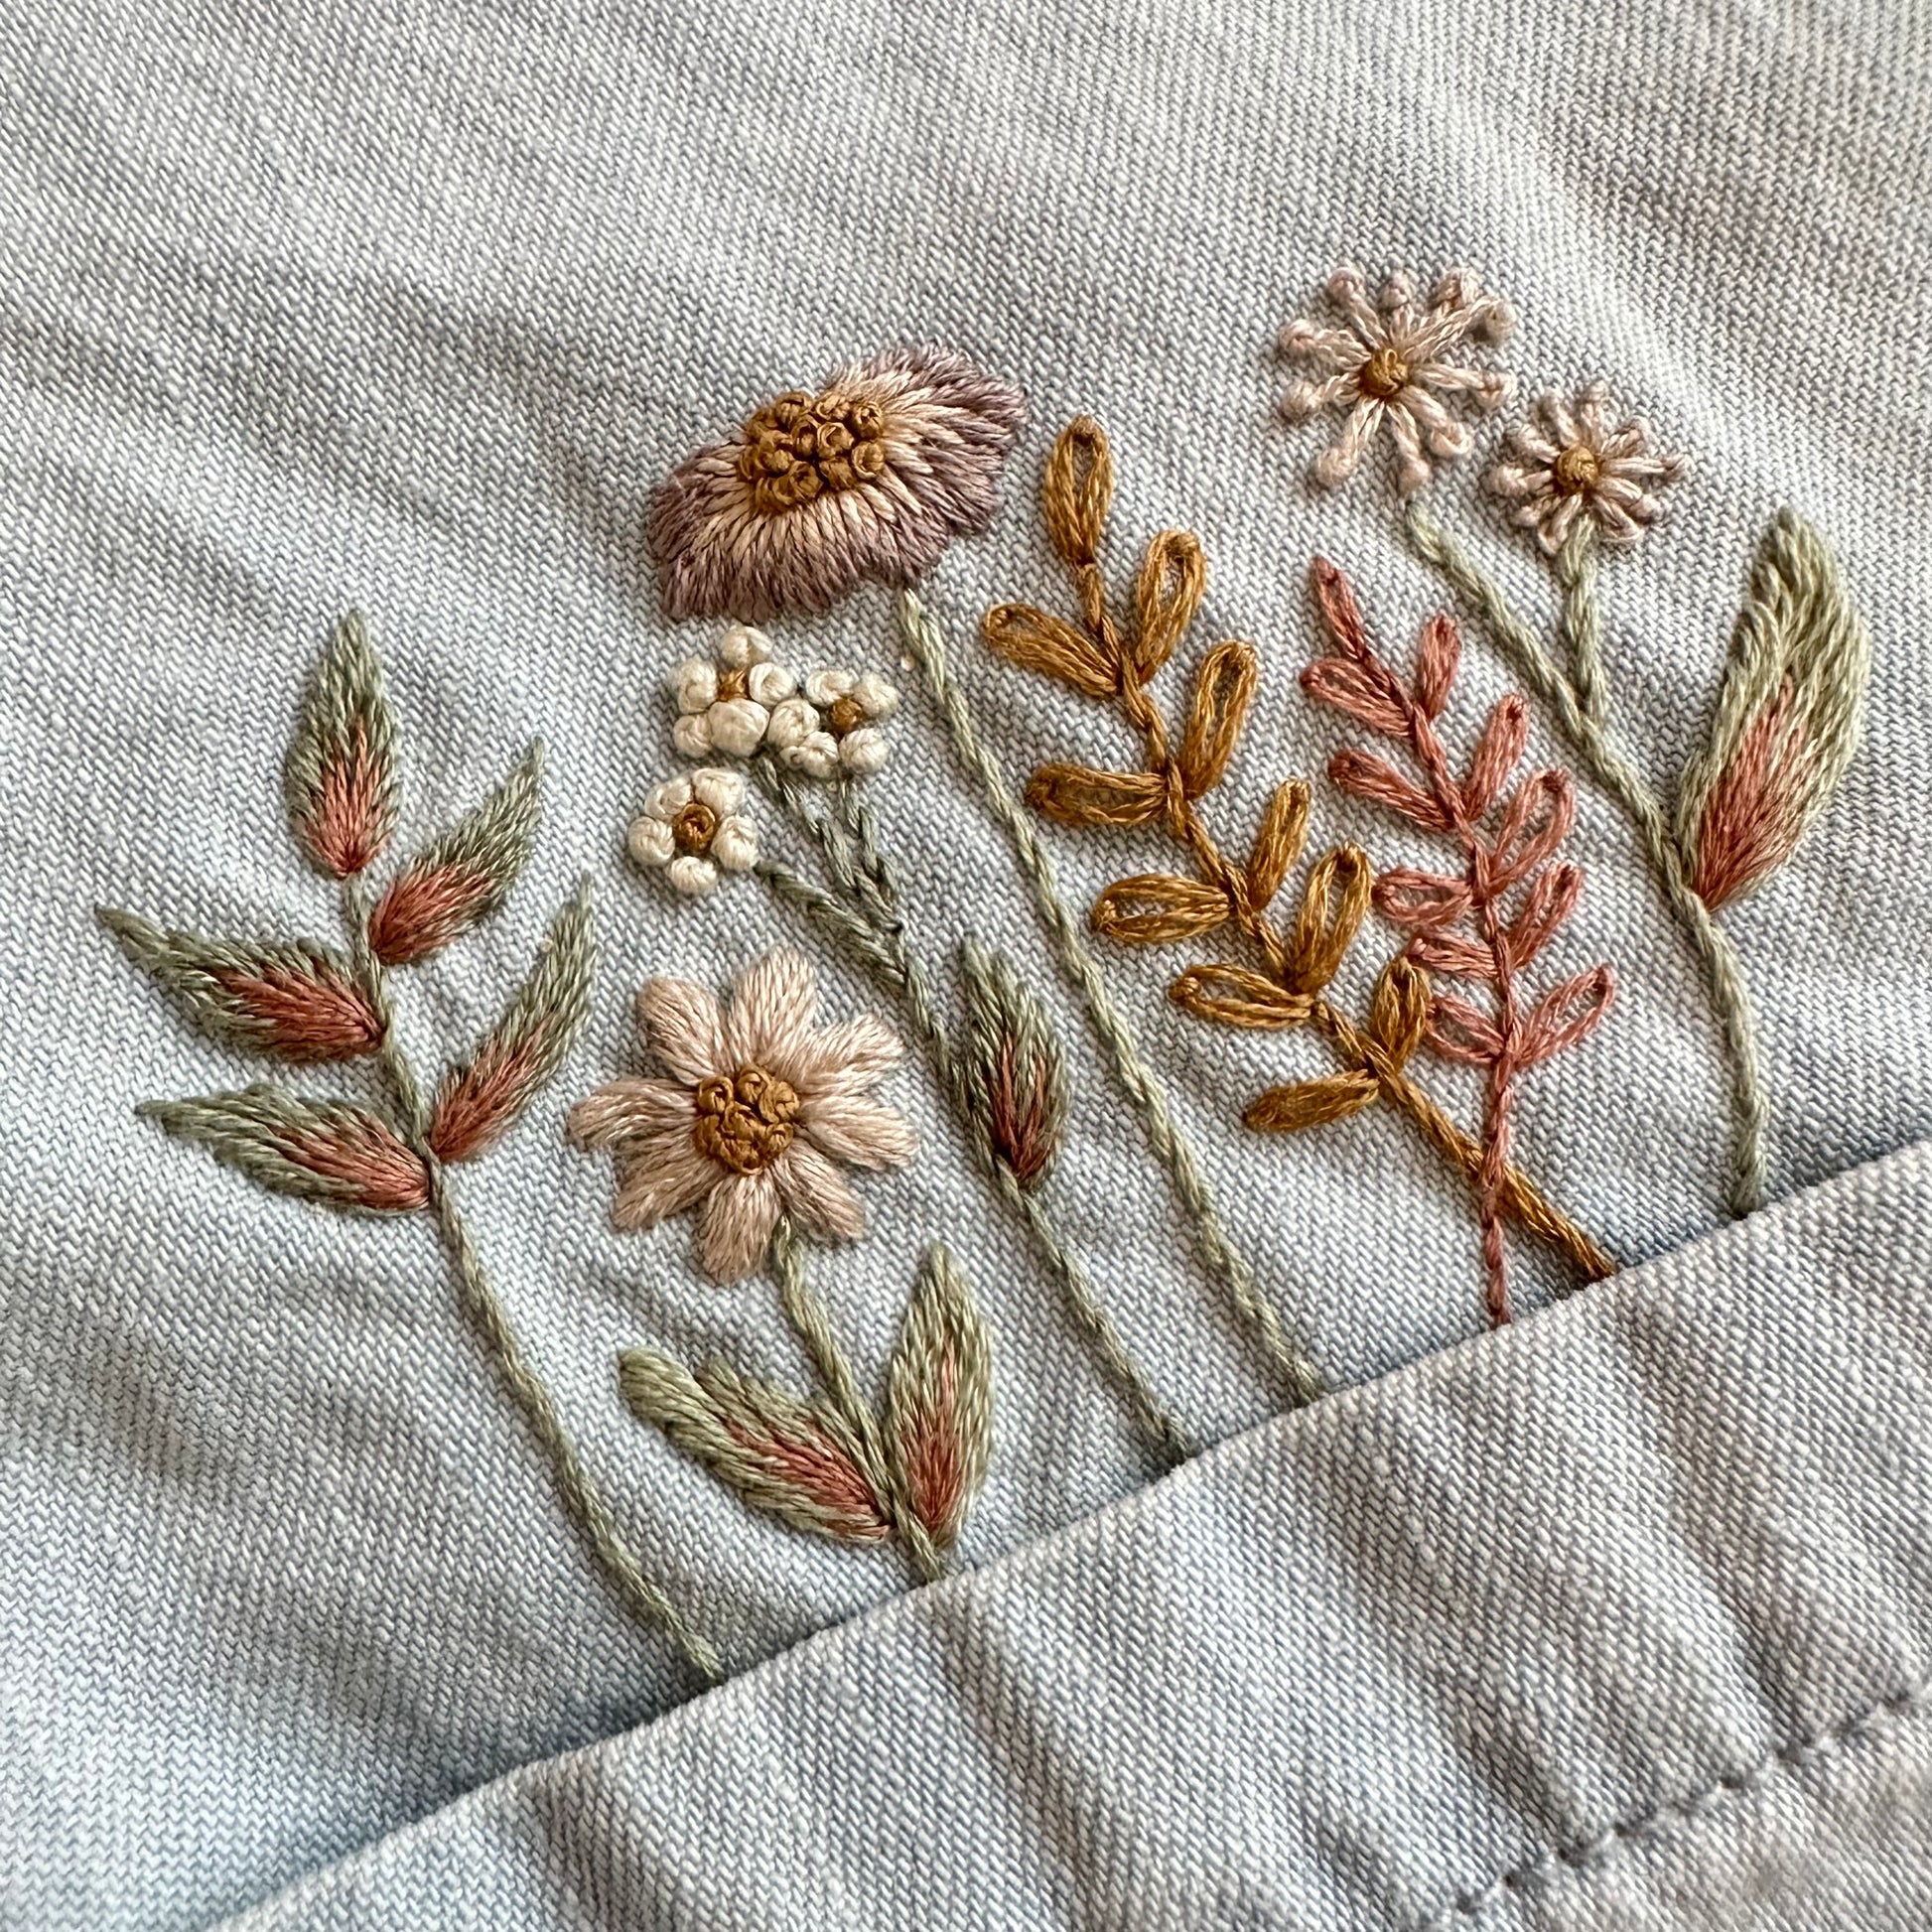 Stick and Stitch Botanical Embroidery Patterns – Sincerely Laura